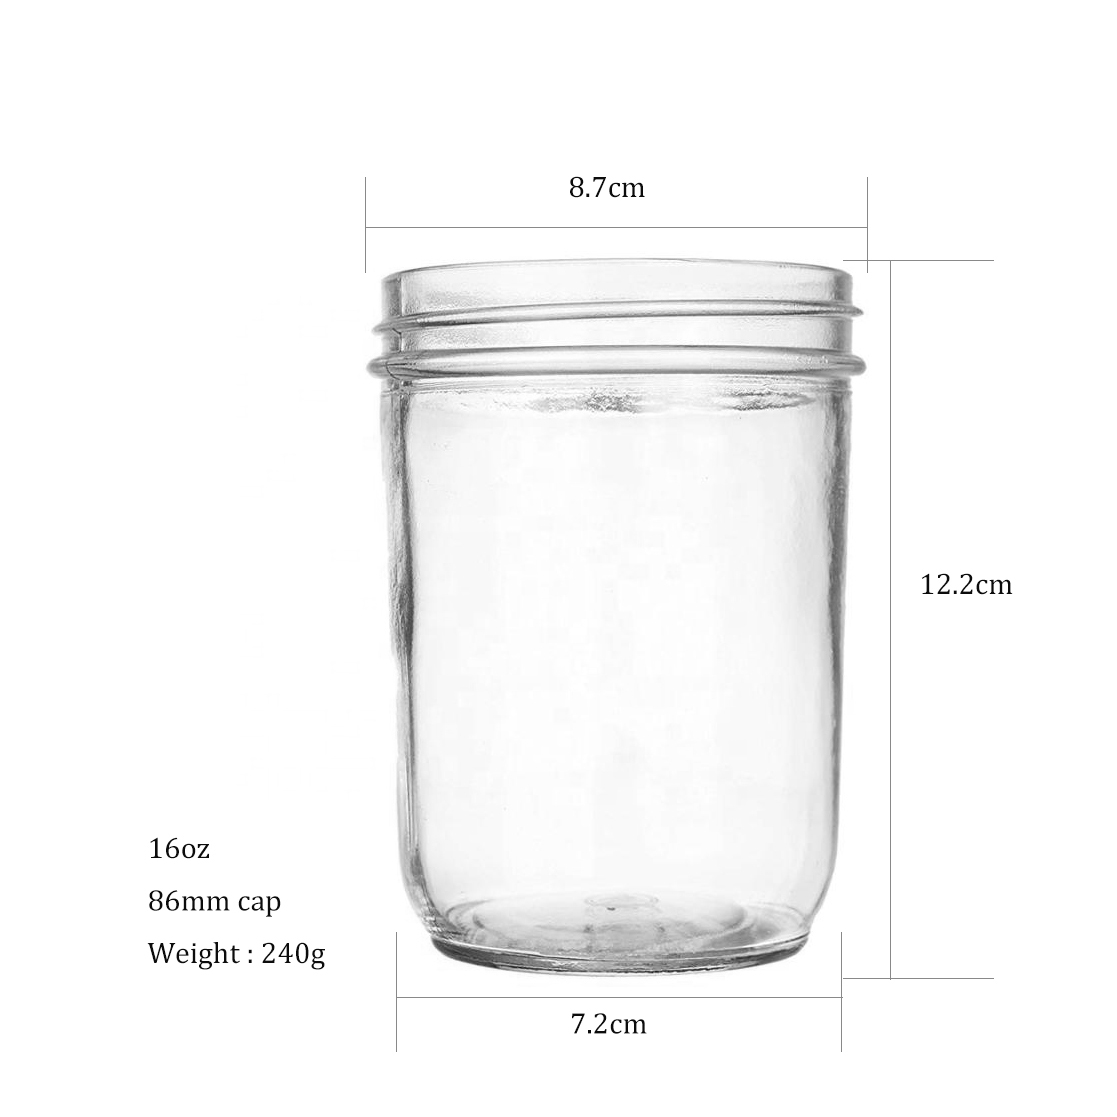 16oz 500ml Glass Mason Jar for Honey Ice Cream Cookie with Wide Mouth Metal Lid 